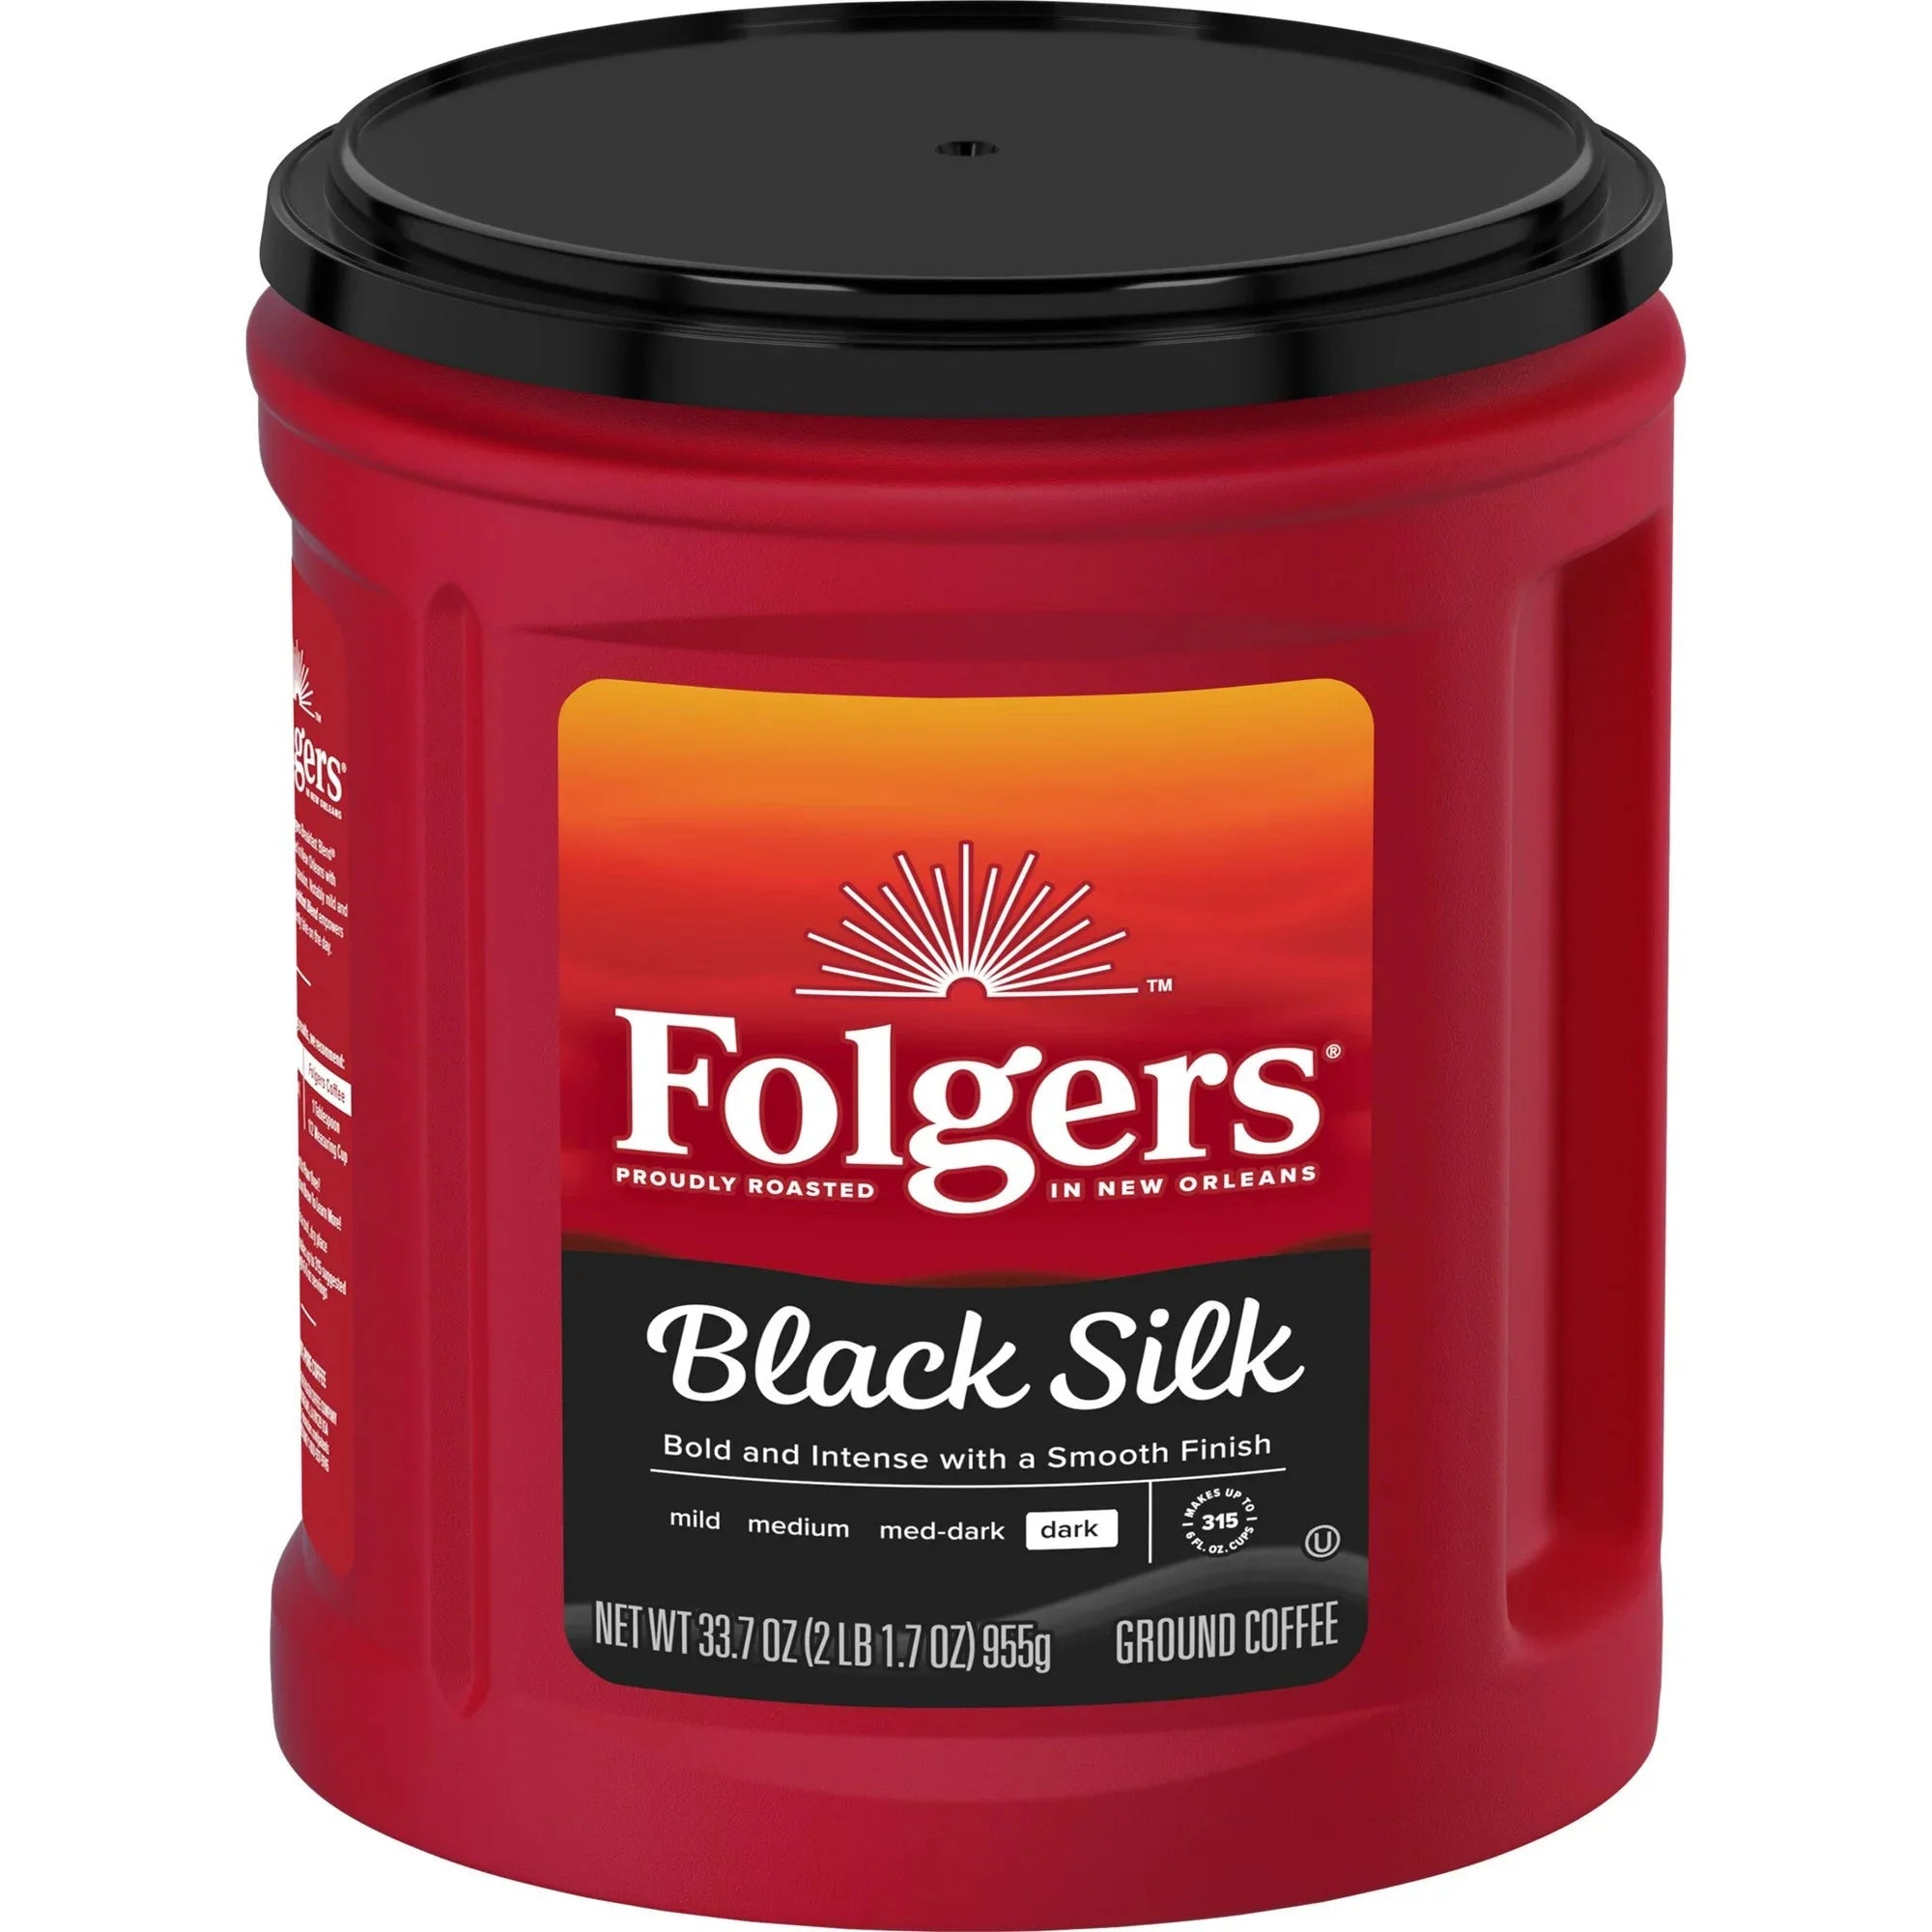 Wholesale prices with free shipping all over United States Folgers Black Silk Ground Coffee, Smooth Dark Roast Coffee, 33.7Ounce Canister - Steven Deals